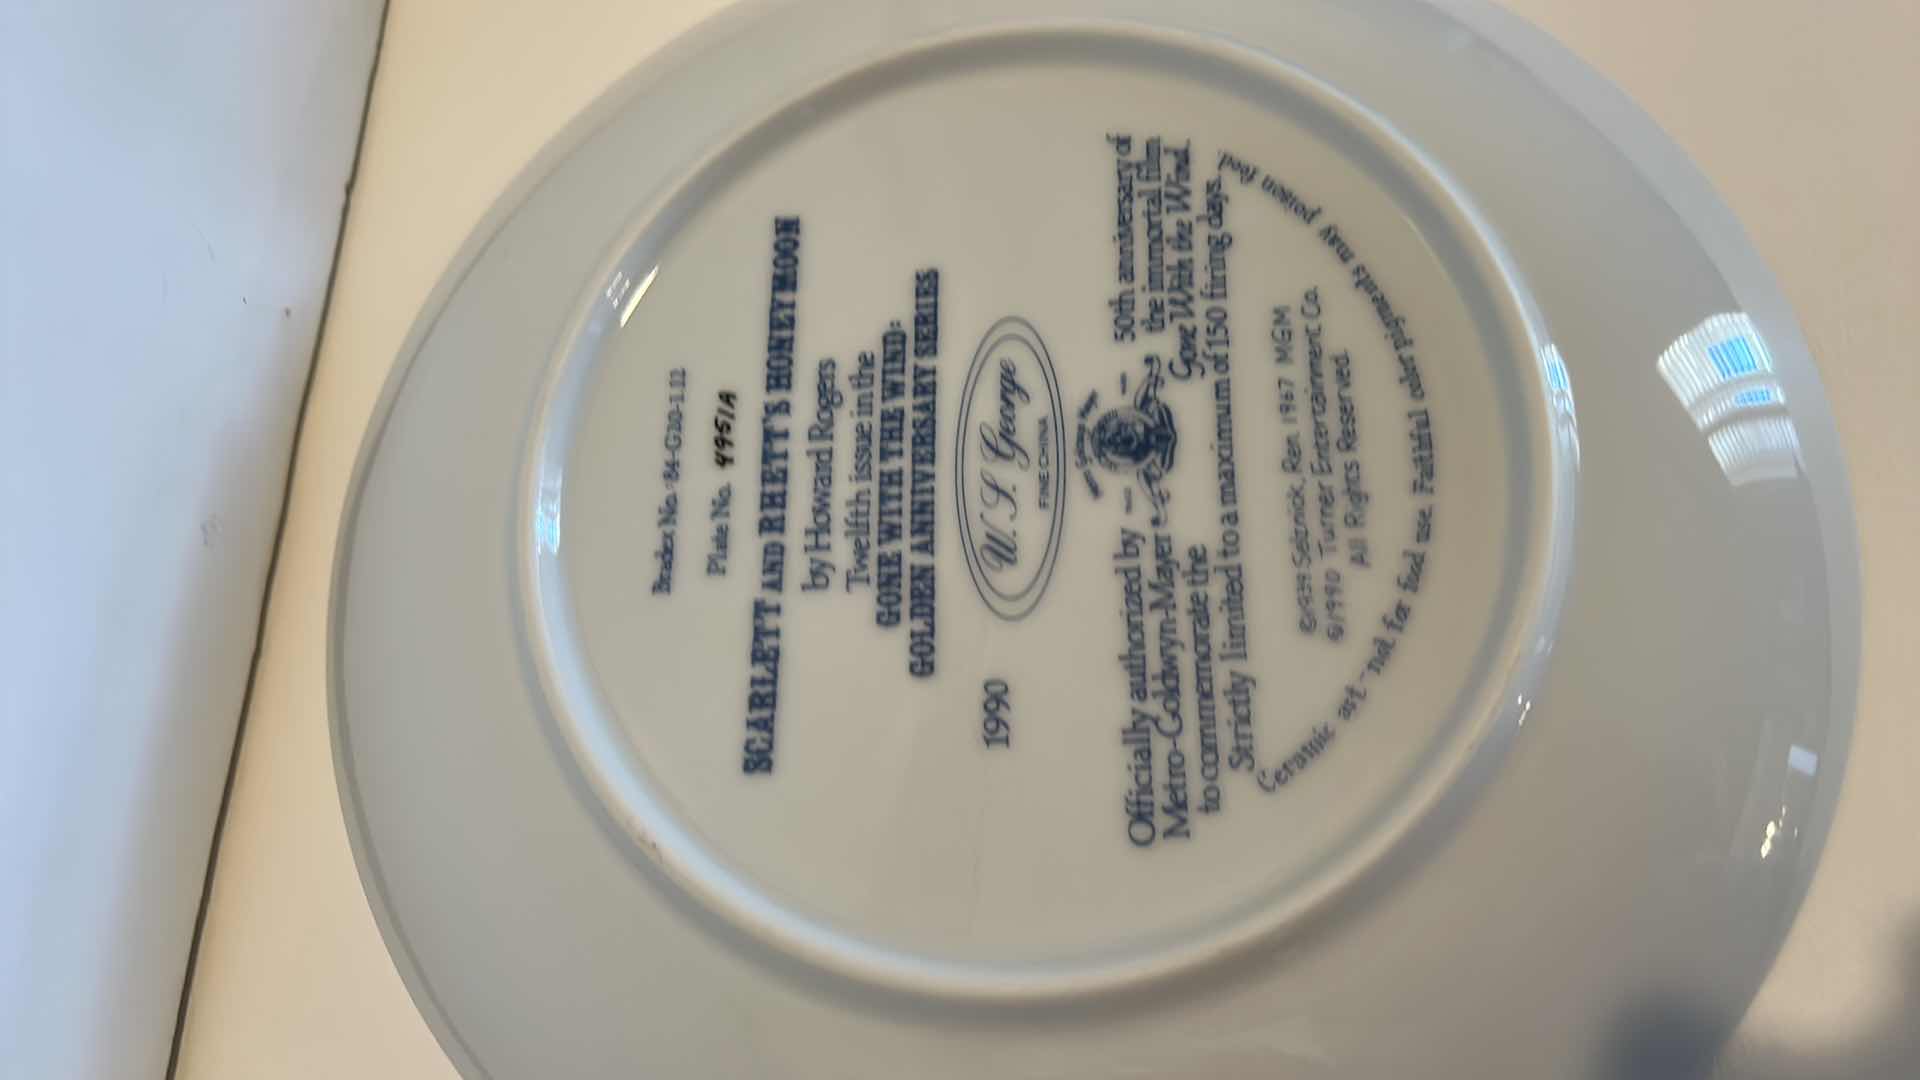 Photo 4 of 2 - COLLECTIBLE FINE CHINA “GONE WITH THE WIND” GOLDEN ANNIVERSARY SERIES BY W.L. GEORGE NUMBERED PLATES 8.5”